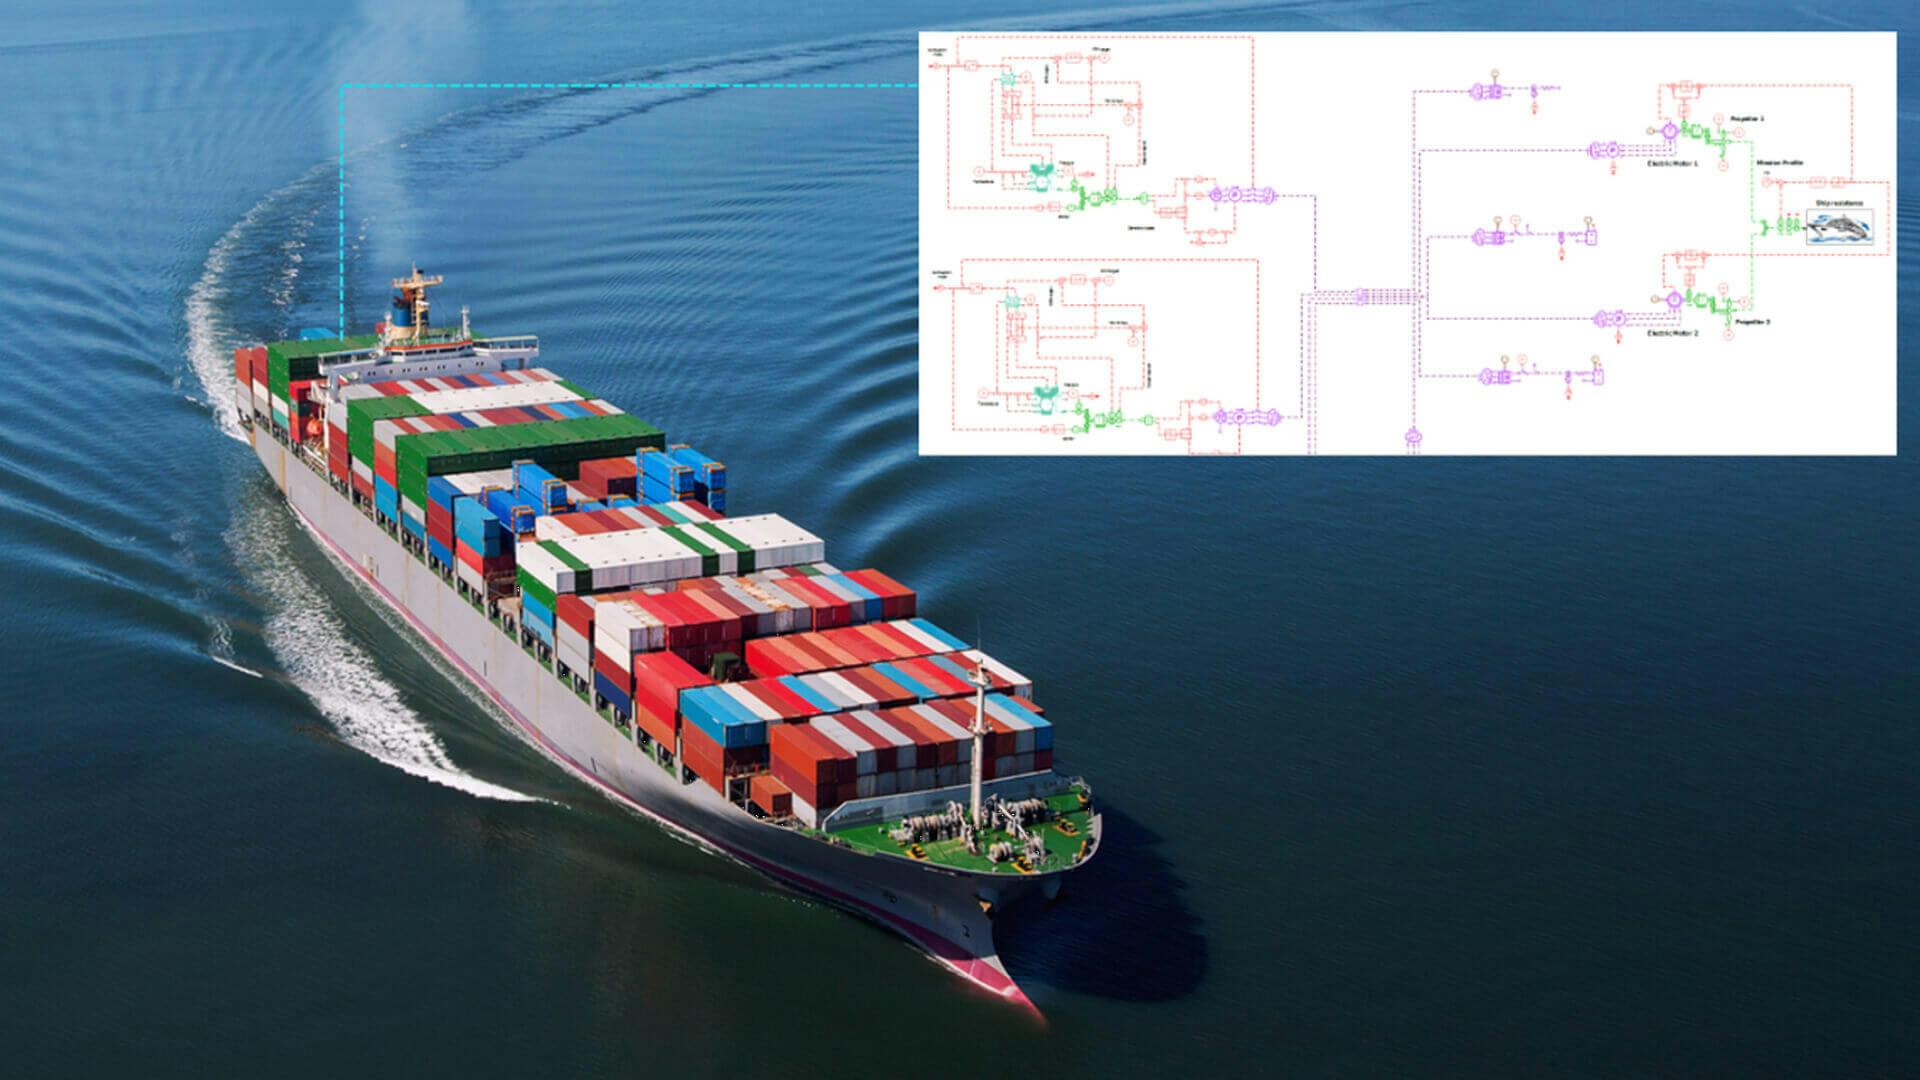 Optimizing vessel propulsion architecture with system simulation